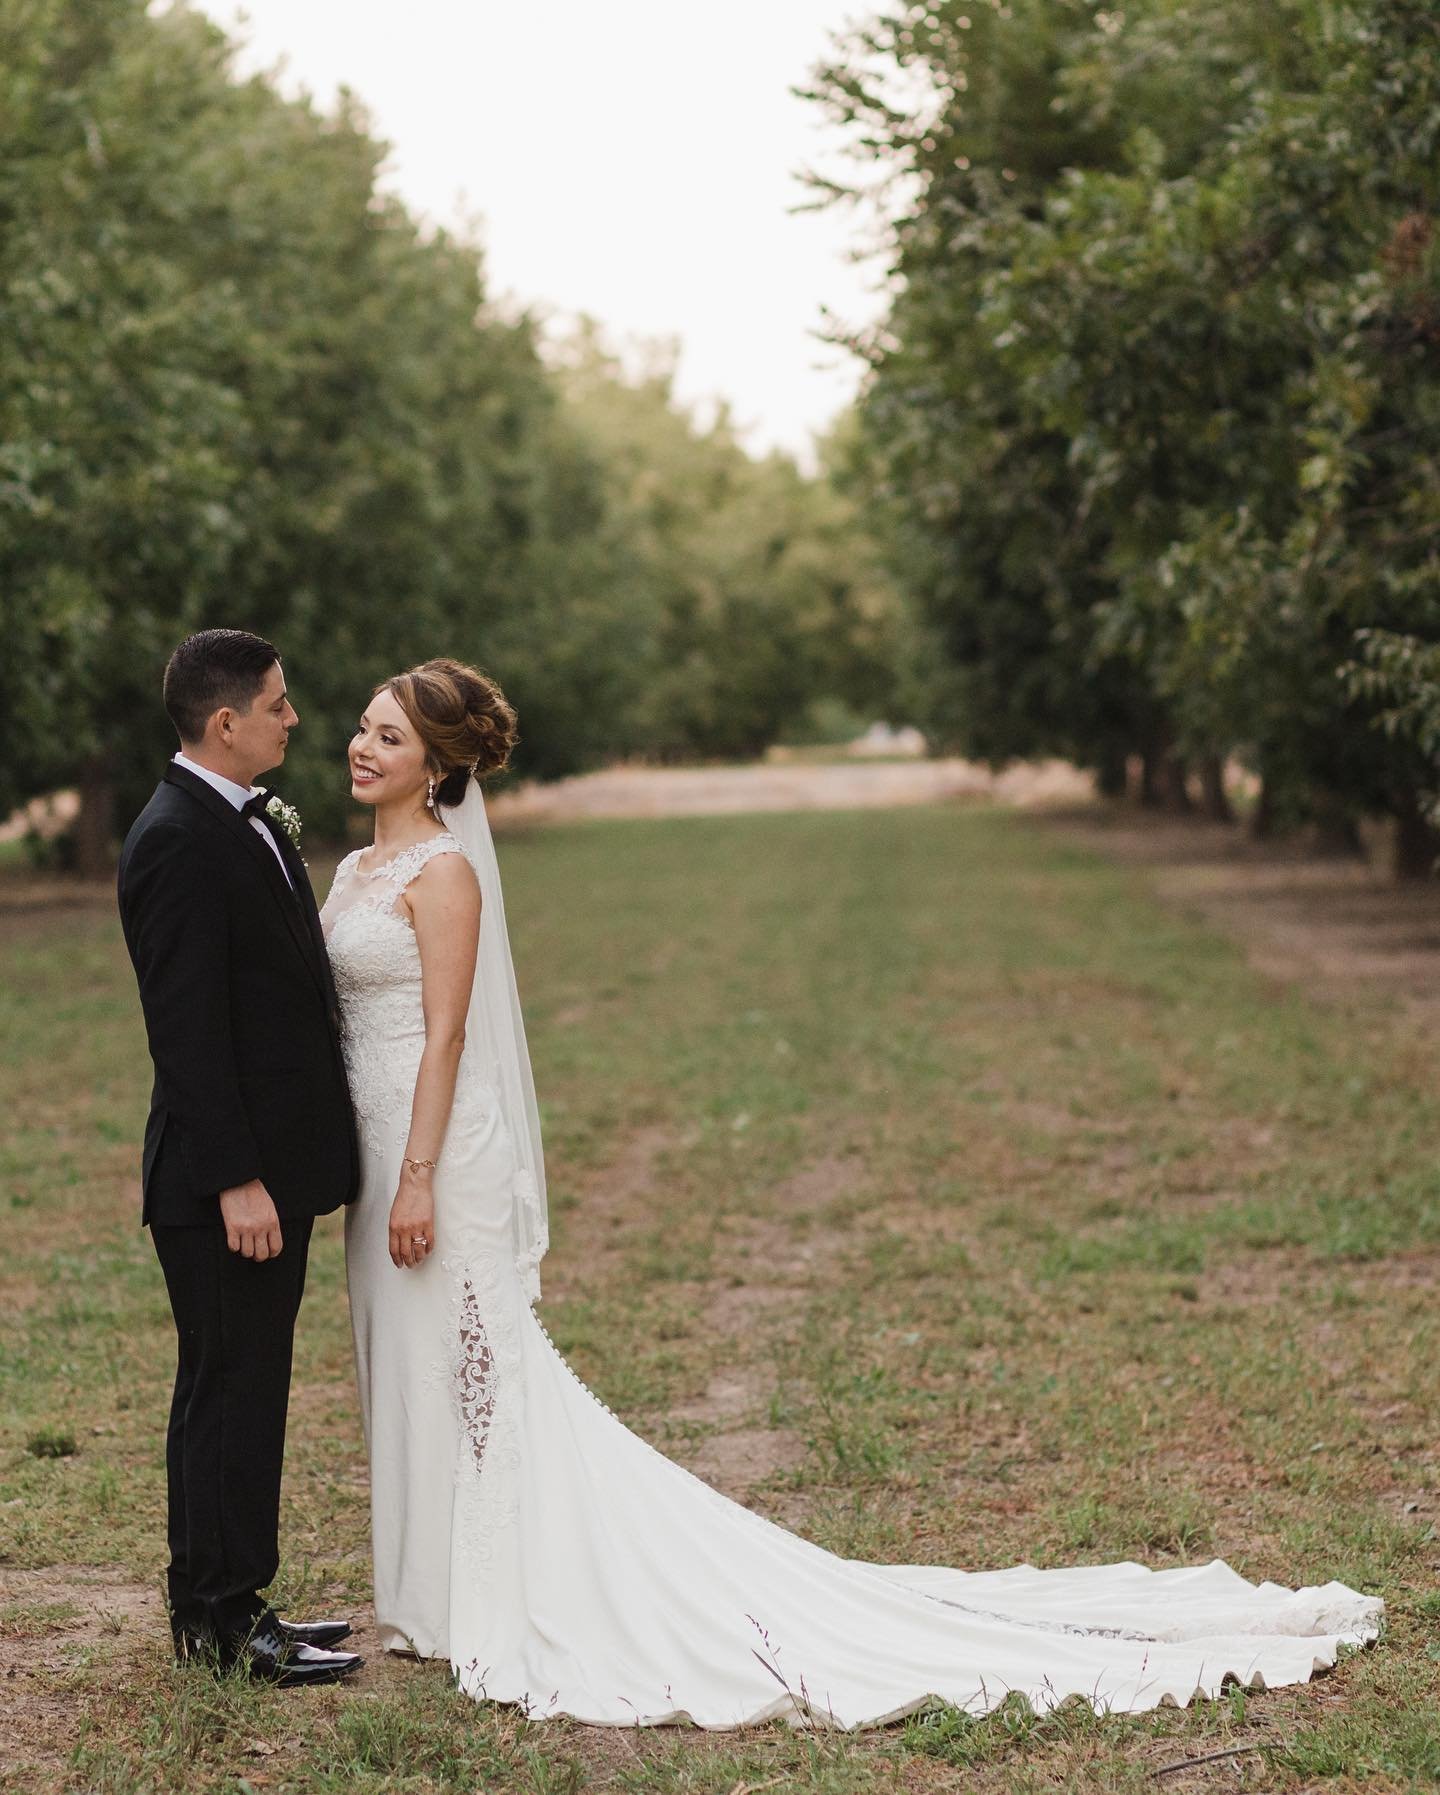 Can&rsquo;t get over these beautiful photos that we captured in their family&rsquo;s orchards. 🥰 ❤️
&bull;
&bull; 
&bull;
#palamoraevents #lascruceswedding #theknot #wedding #palamora #lascruces #brideandgroom